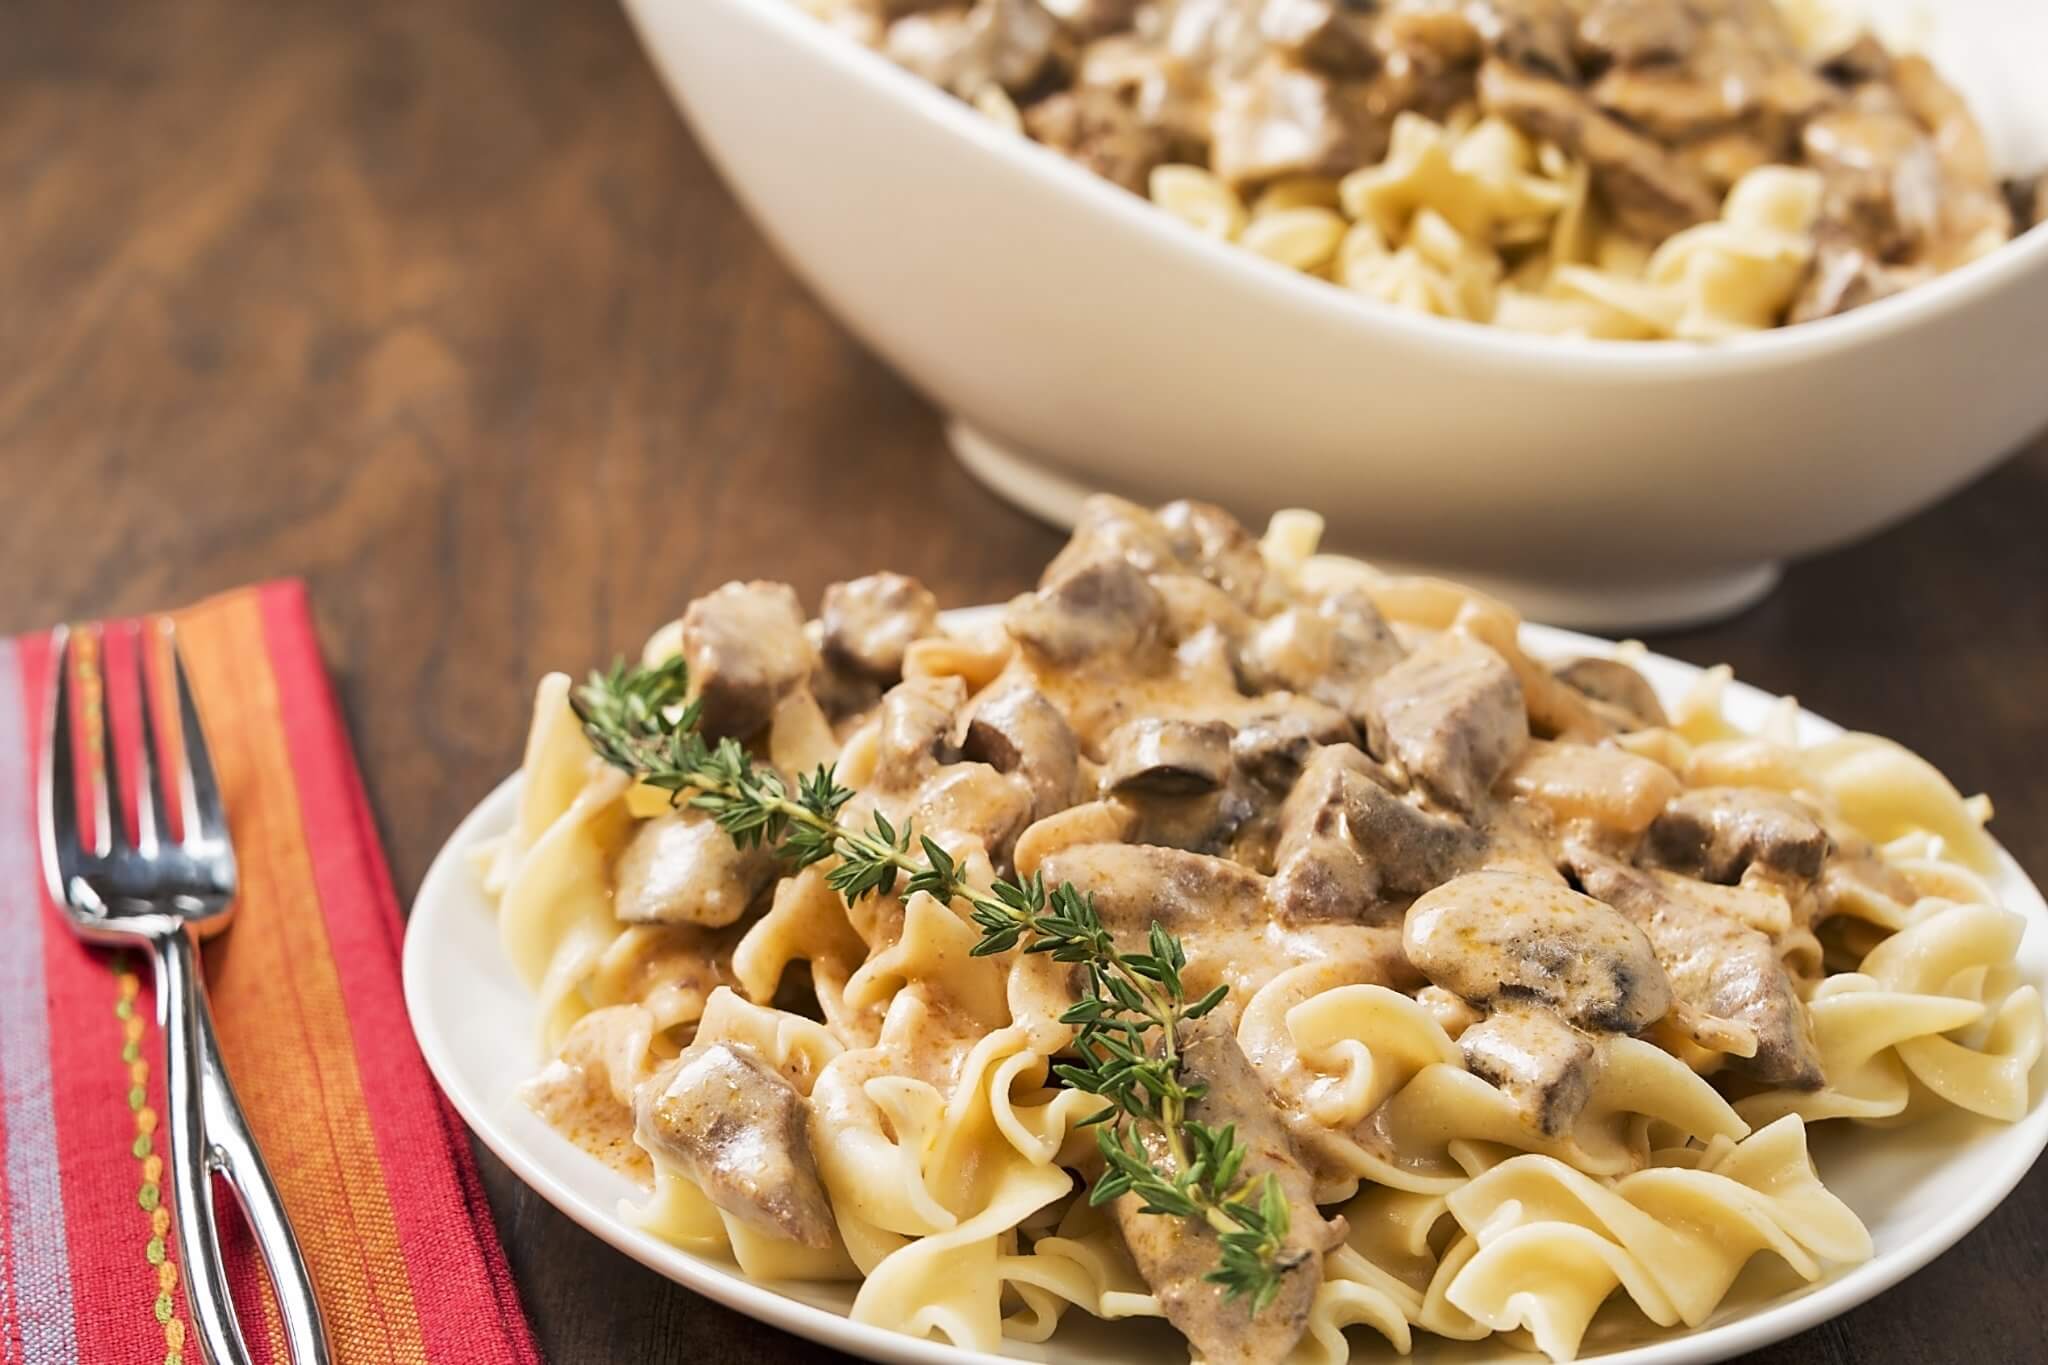 Penne with meat and Mushrooms